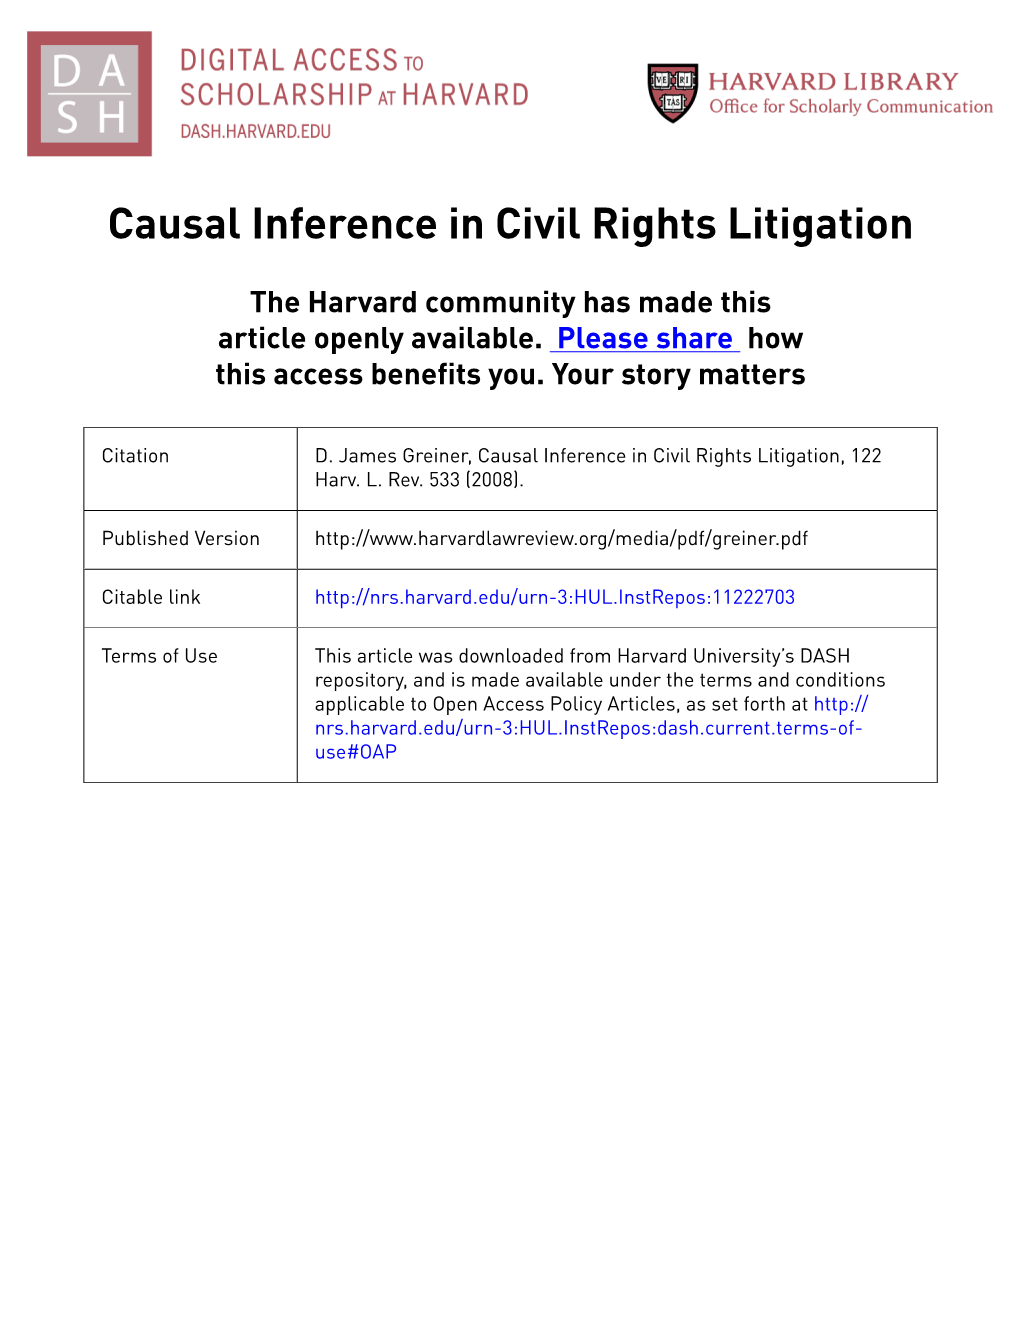 Causal Inference in Civil Rights Litigation